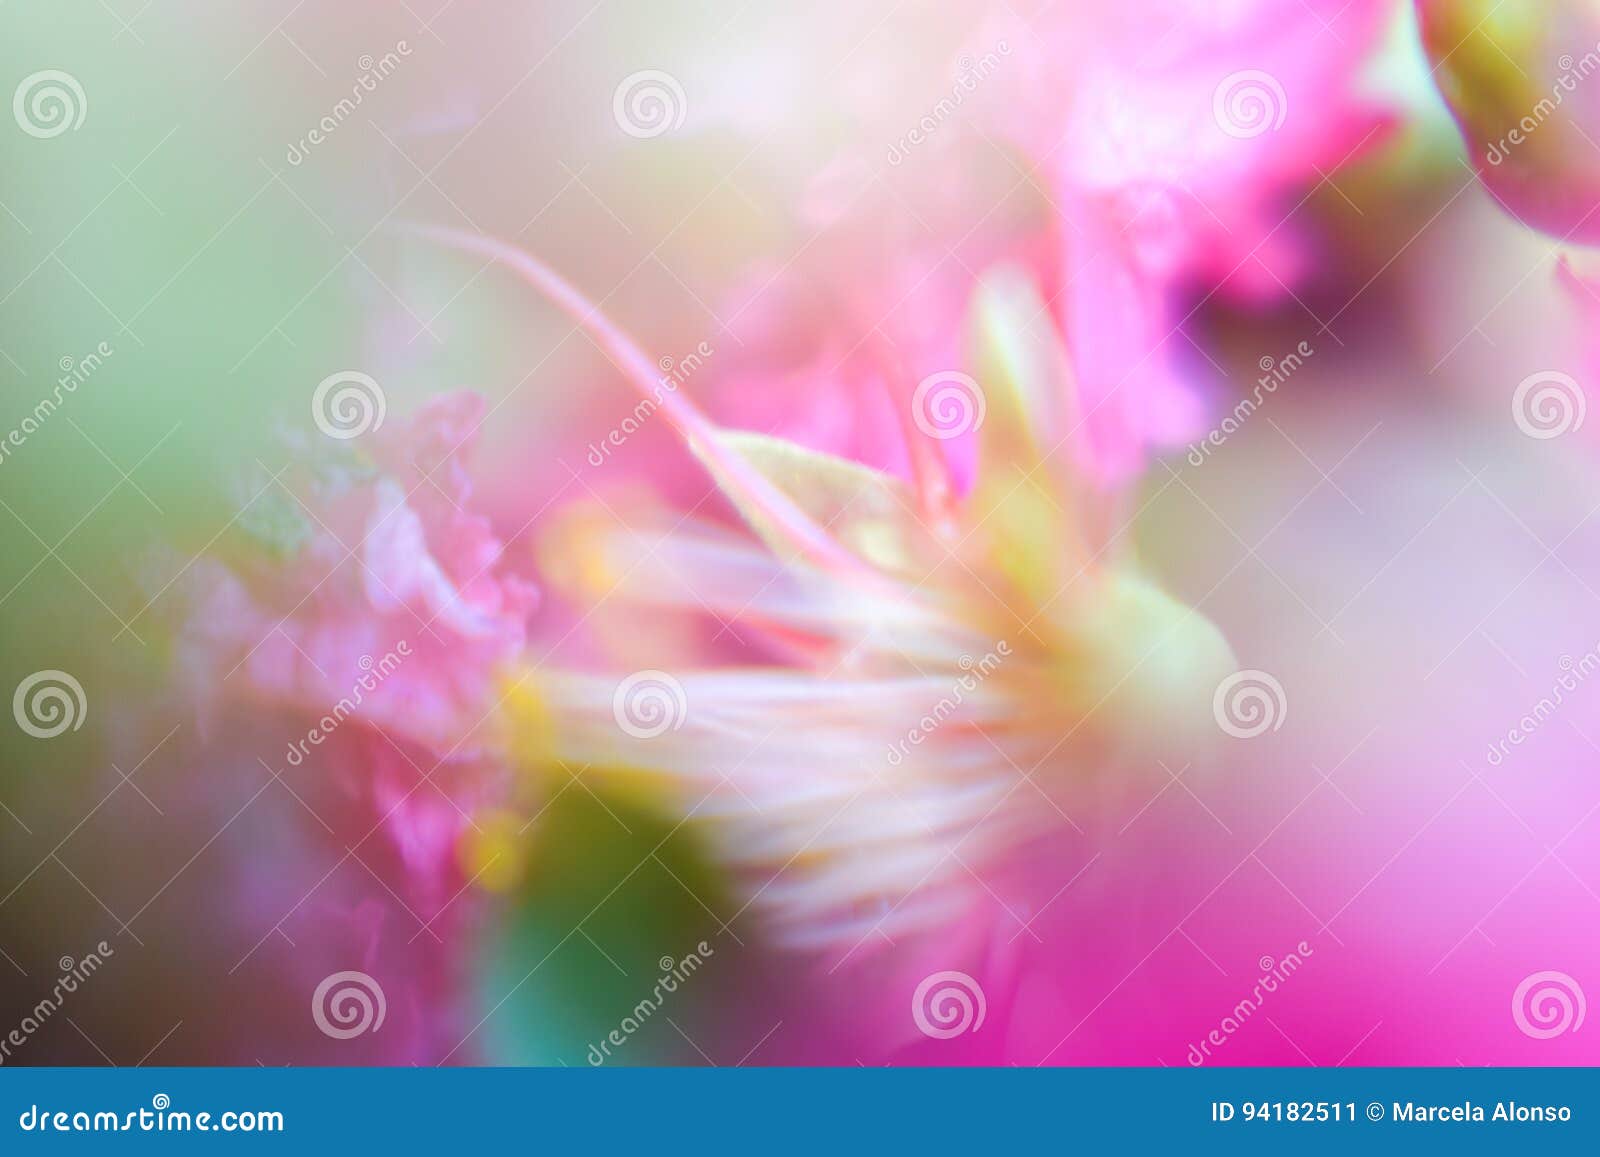 abstract background silky blurred flowers